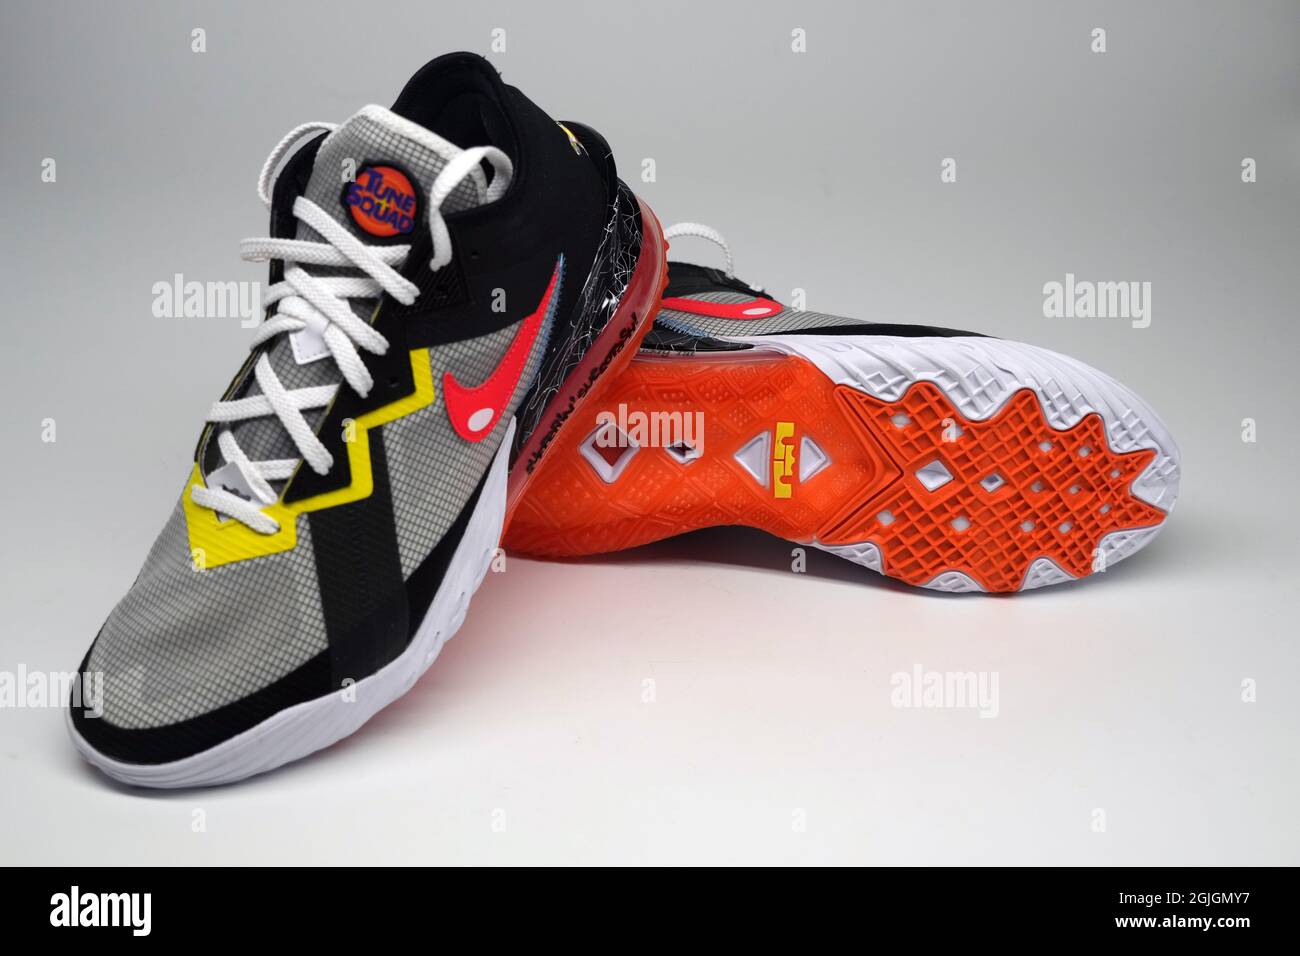 Detailed view of Nike LeBron 18 low limited edition Space Jam 2 edition  shoes. Photo via Credit: Newscom/Alamy Live News Stock Photo - Alamy